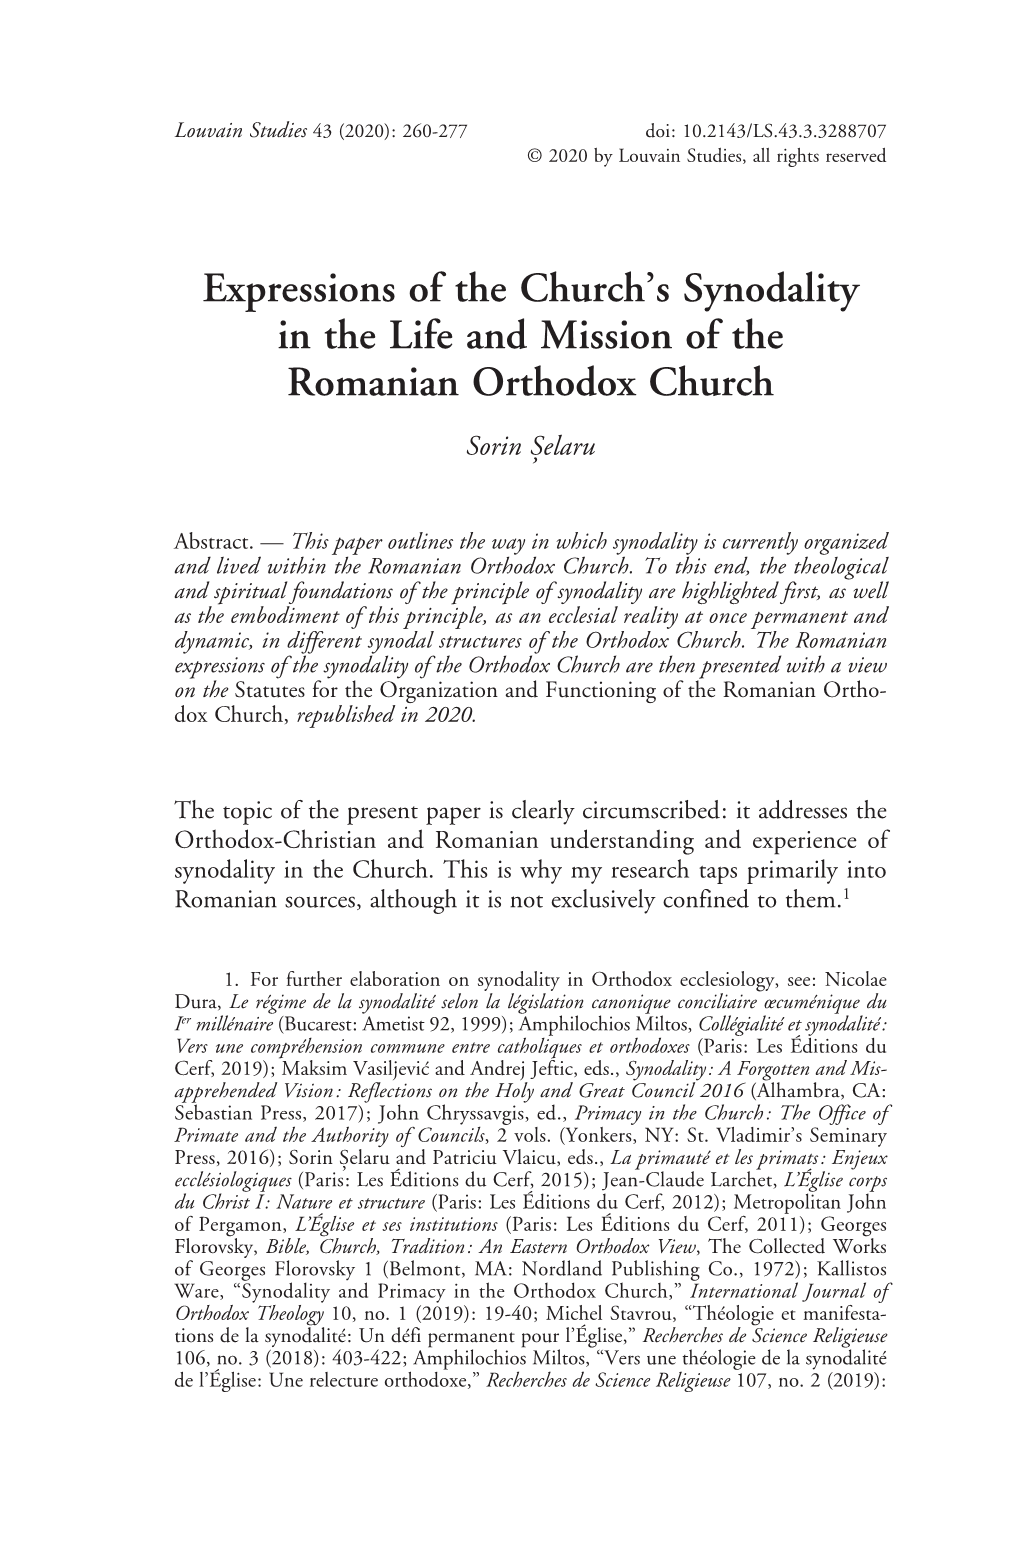 Expressions of the Church's Synodality in the Life and Mission Of